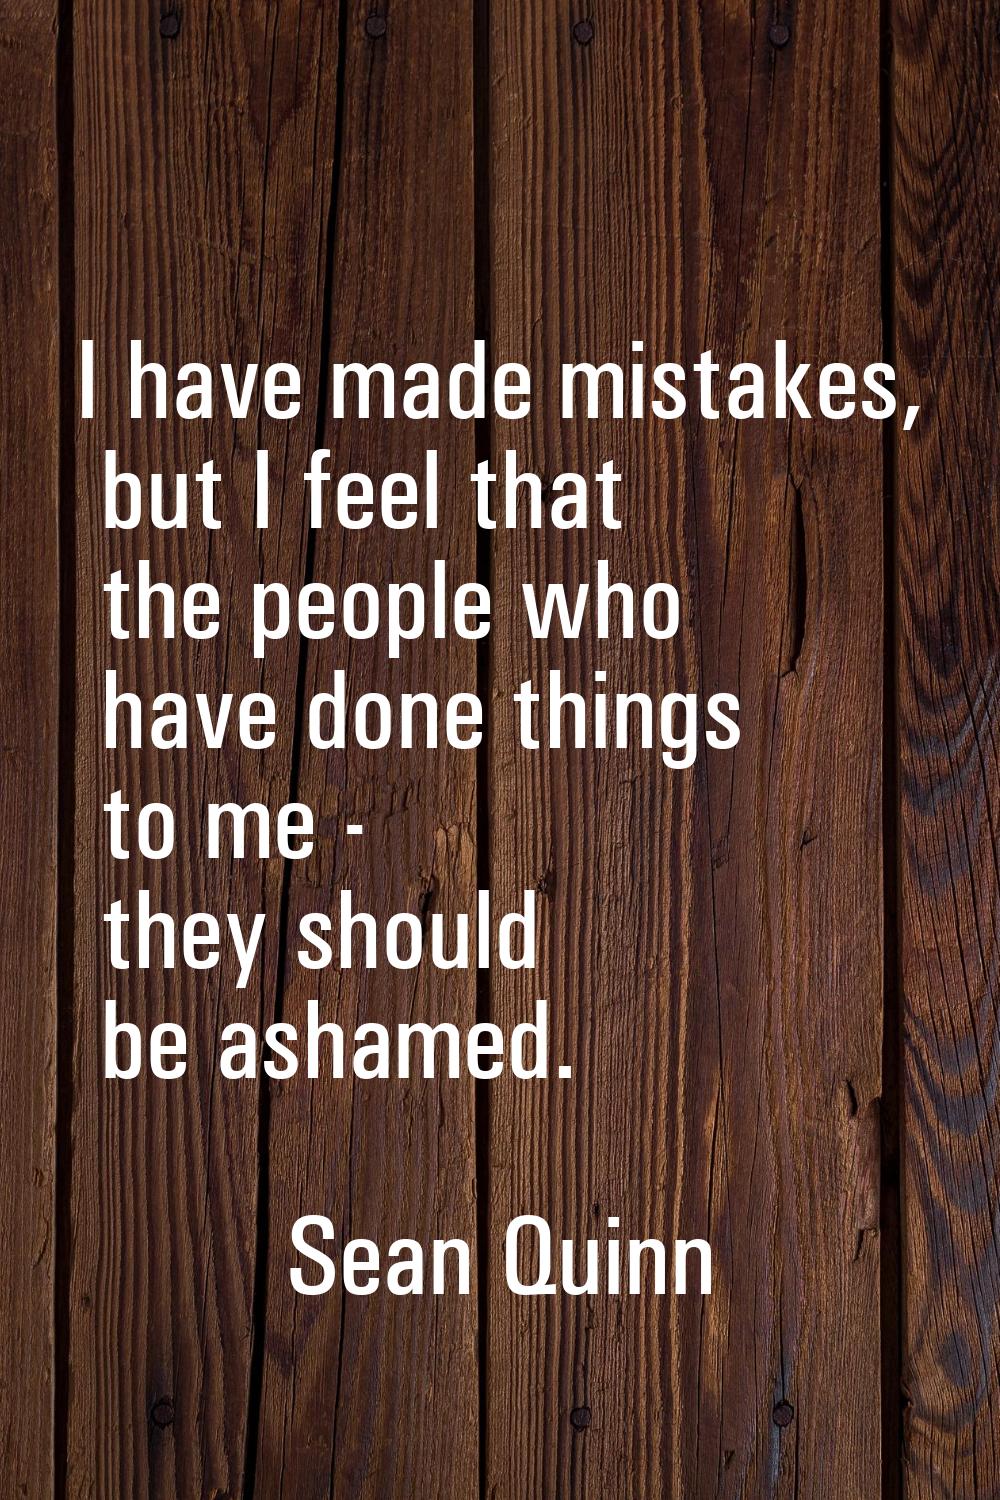 I have made mistakes, but I feel that the people who have done things to me - they should be ashame